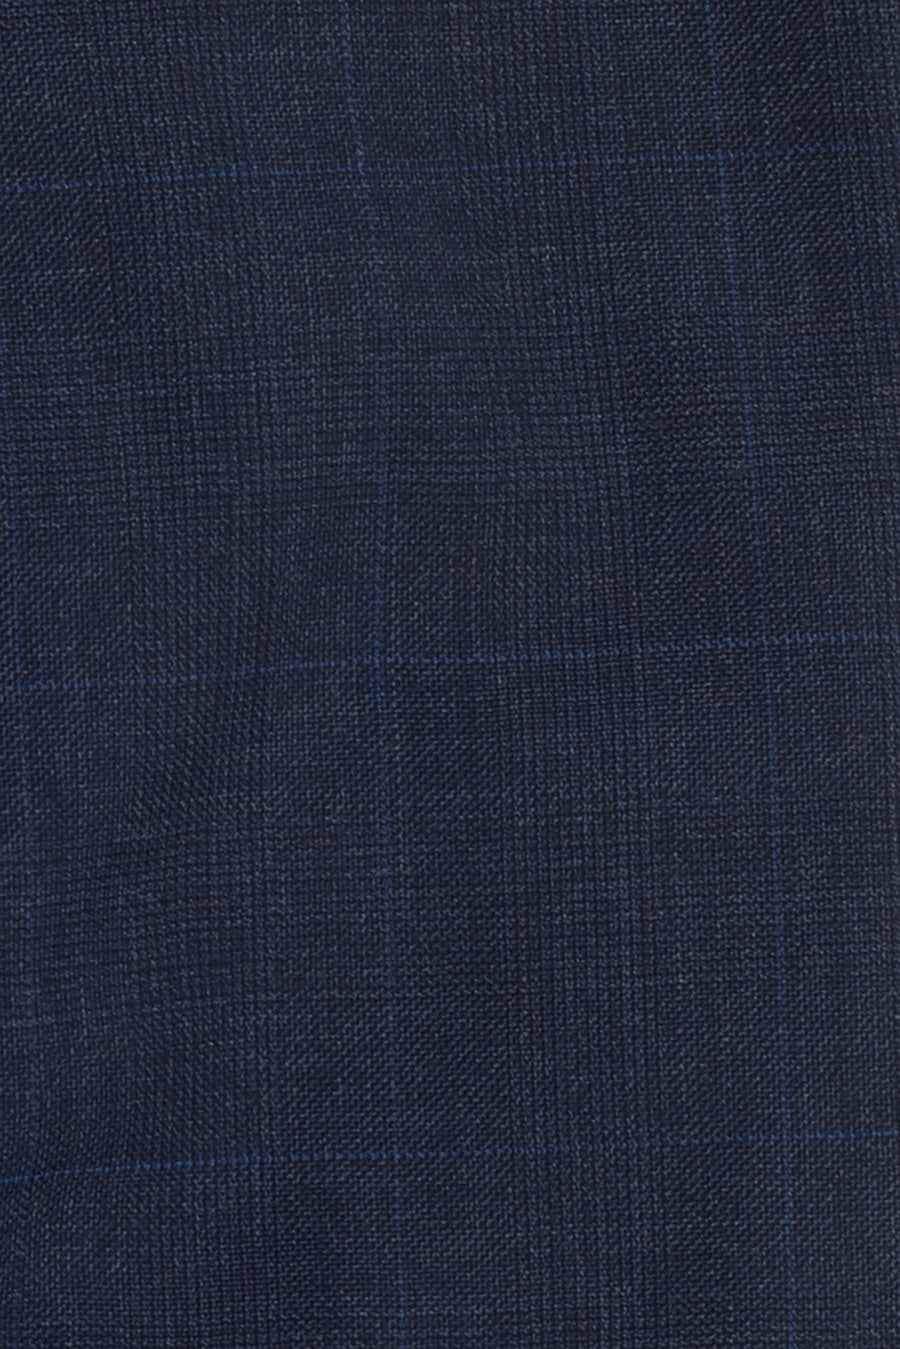 Prince of Wales Checks Dark Navy Suit by Huddersfield Textile, England